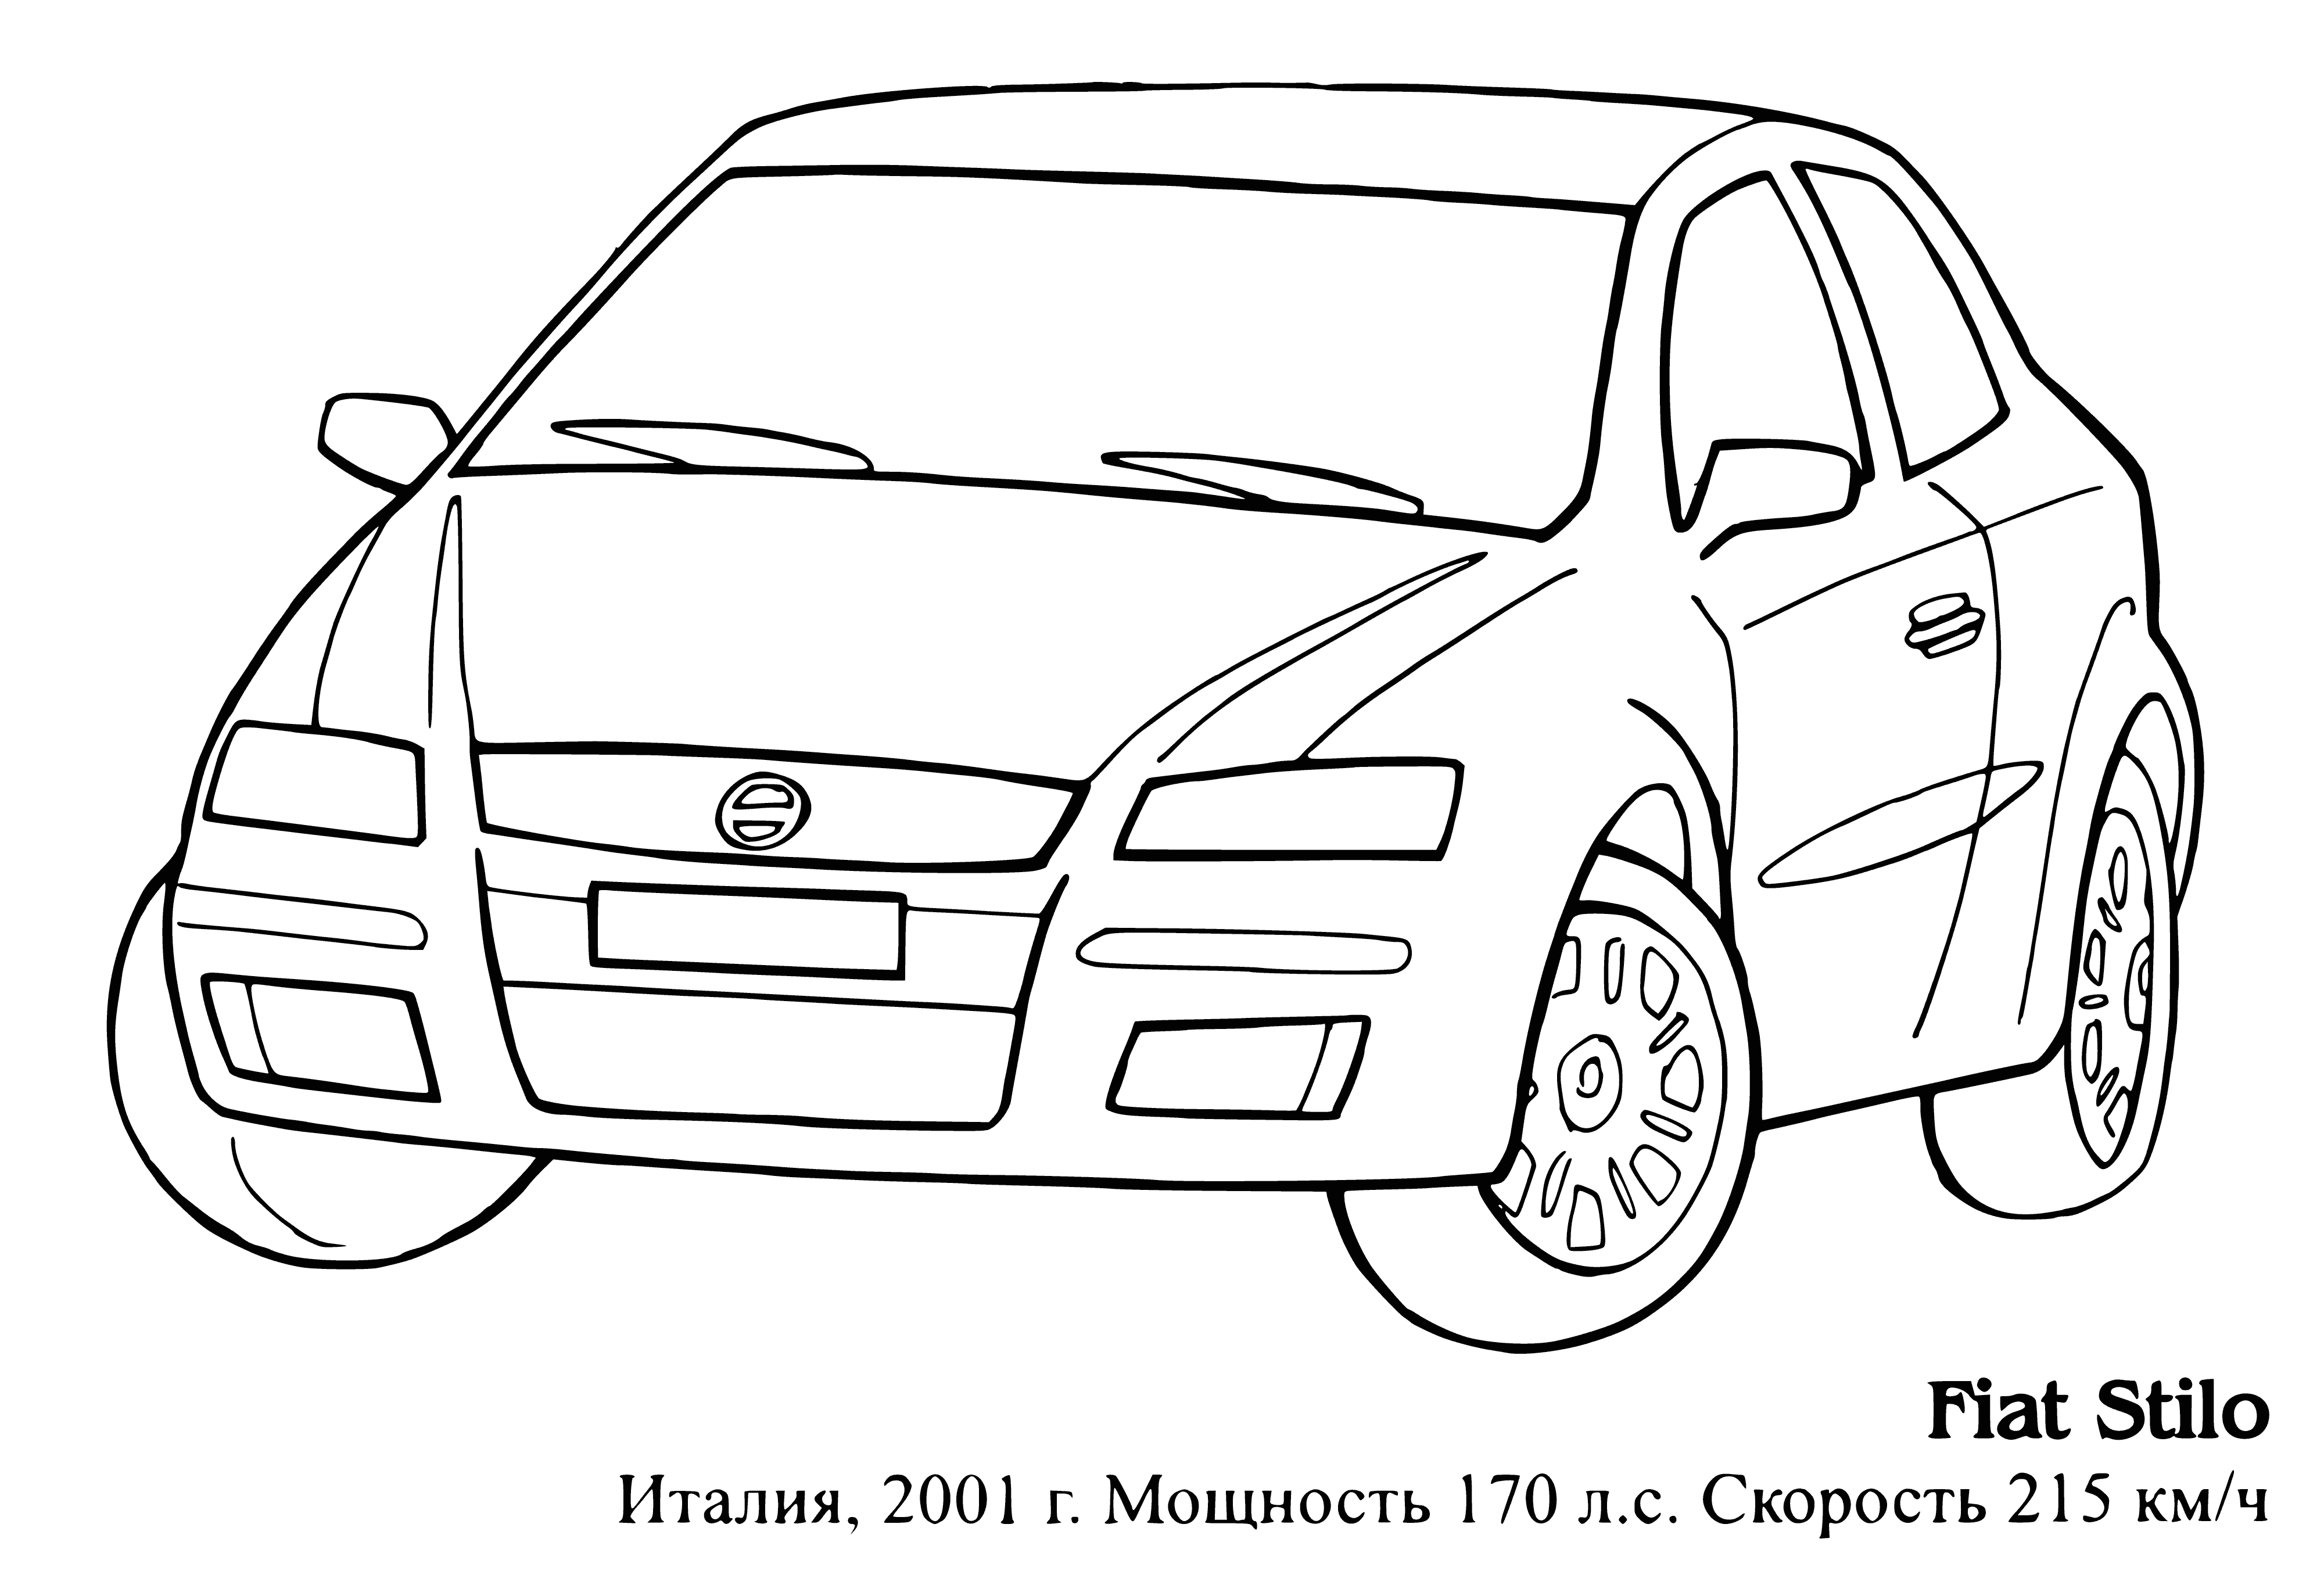 Flat style is coloring page